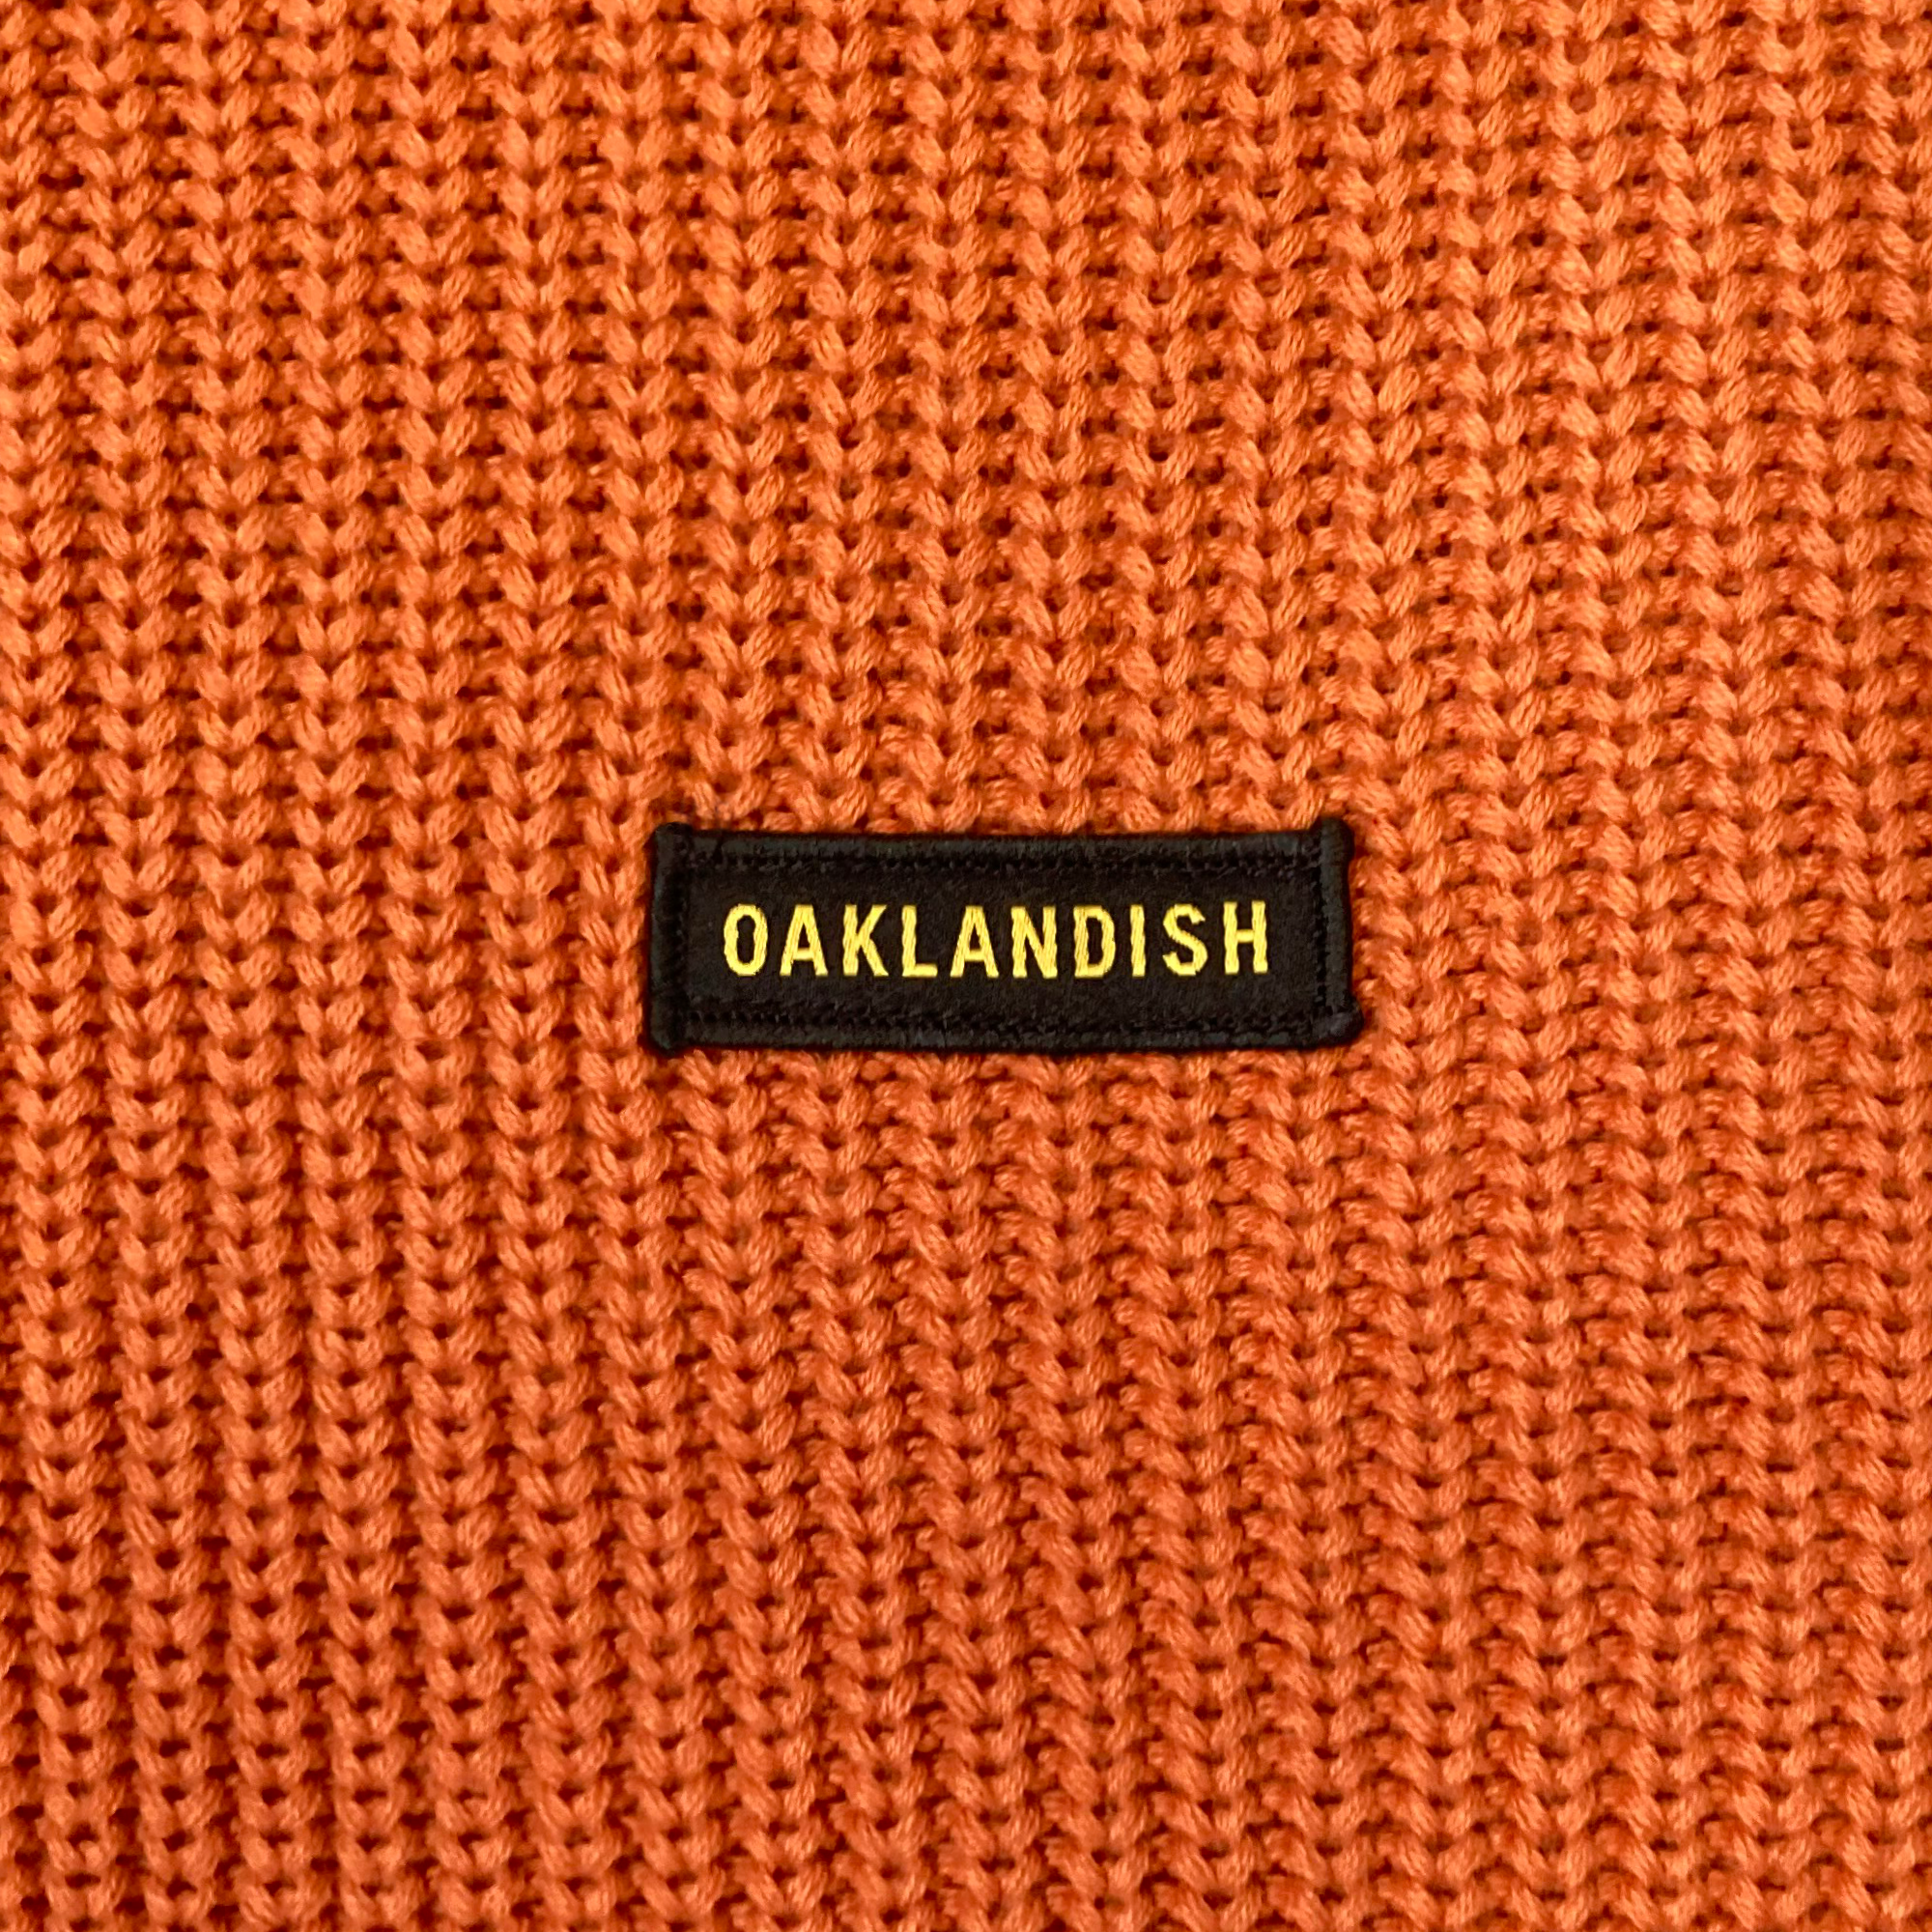 Detailed close-up of embroidered Oaklandish wordmark woven label patch on an autumn orange heavy-knit sweater.